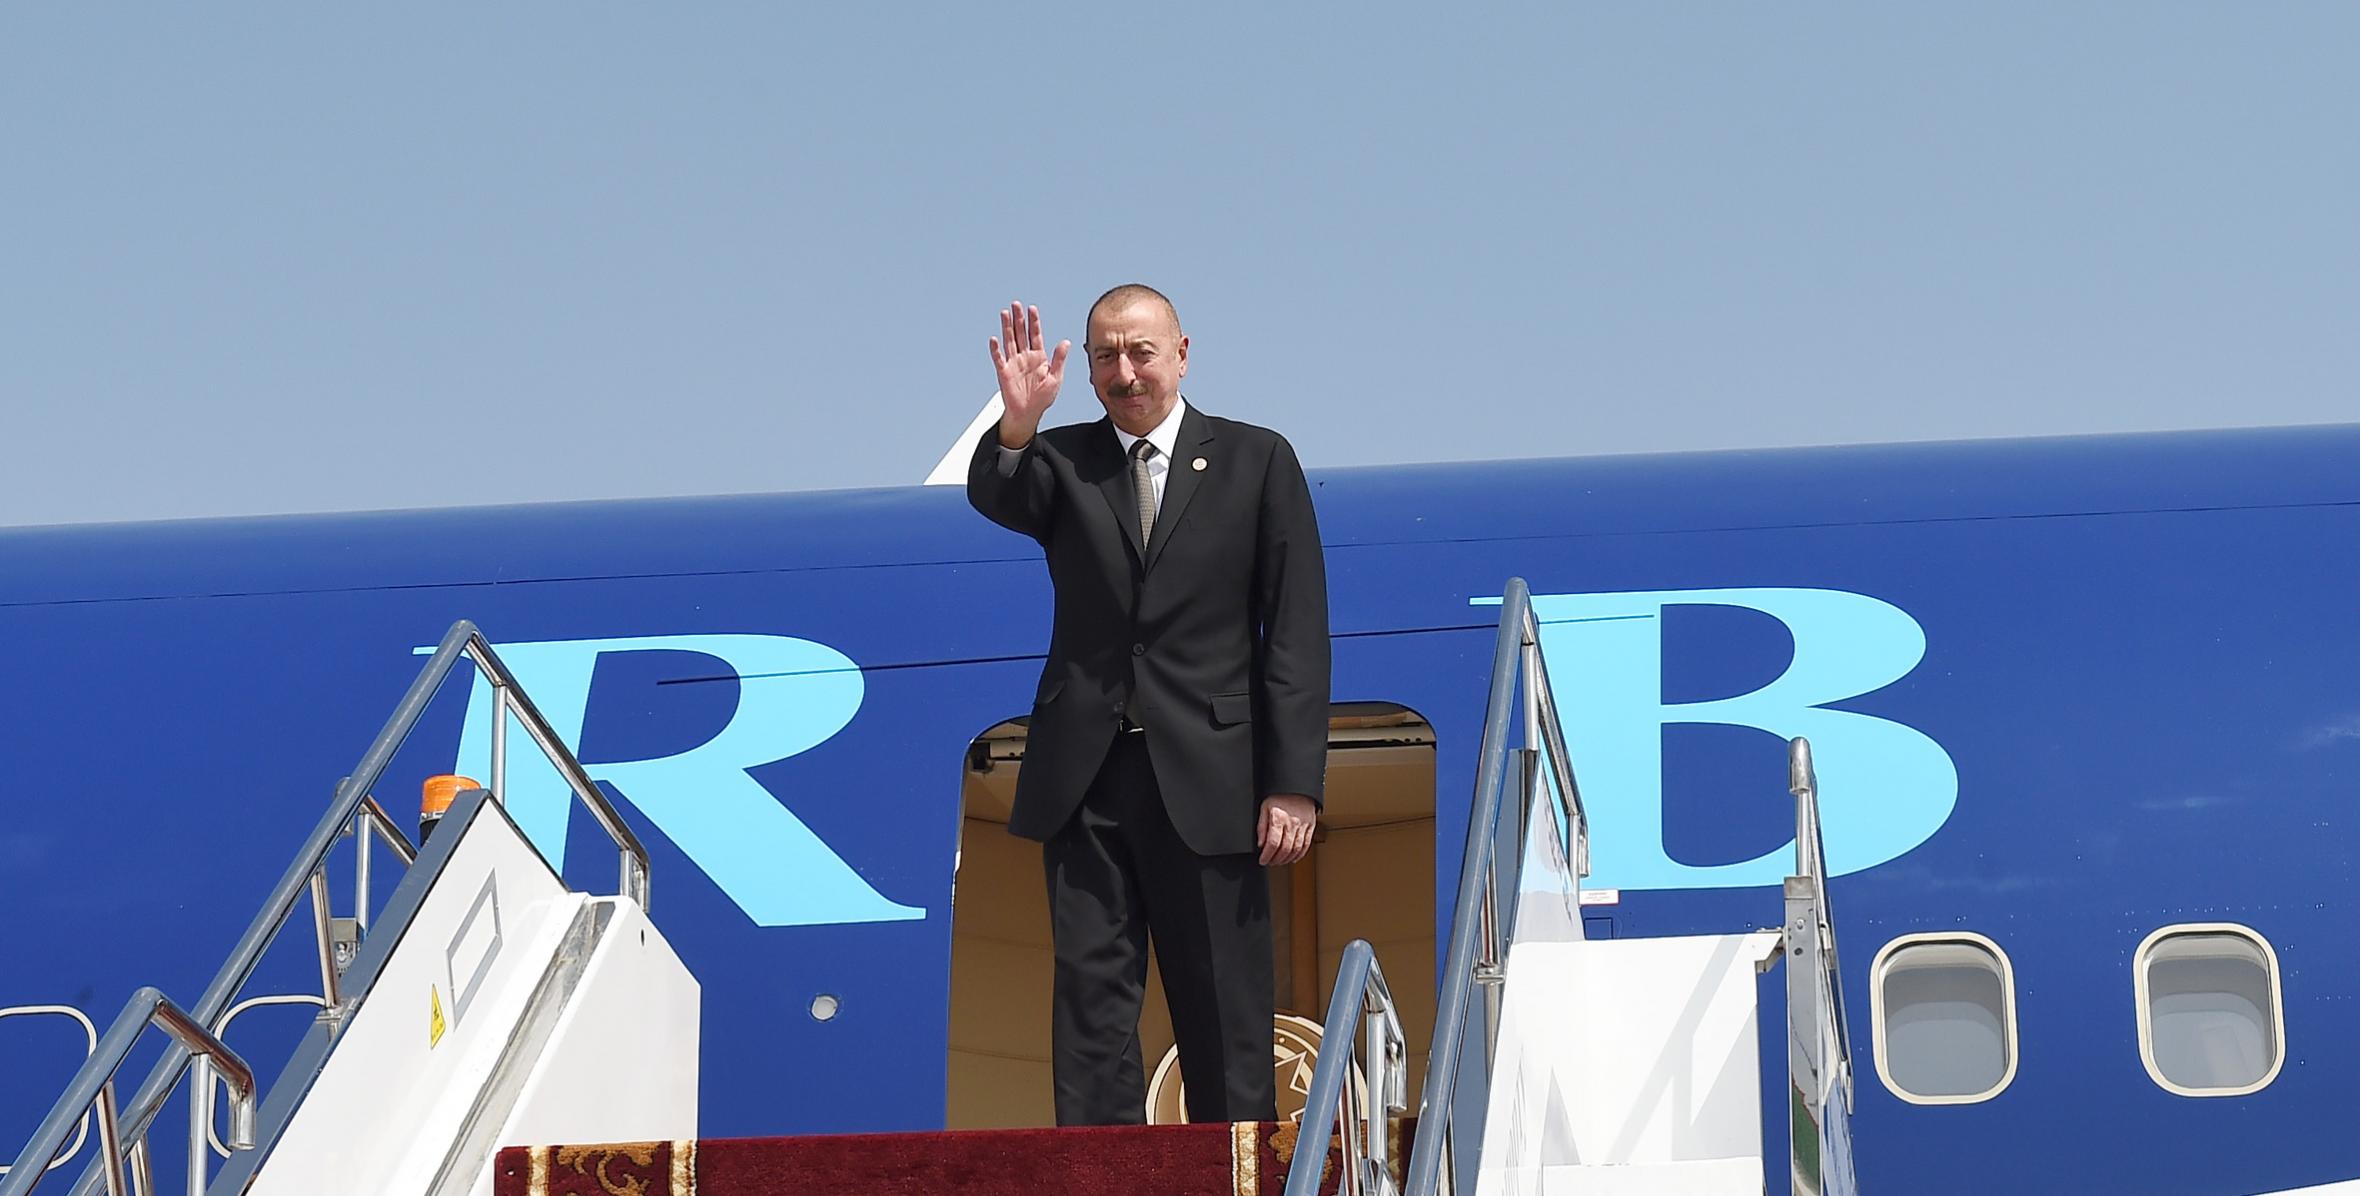 Ilham Aliyev completed his visit to Kyrgyzstan